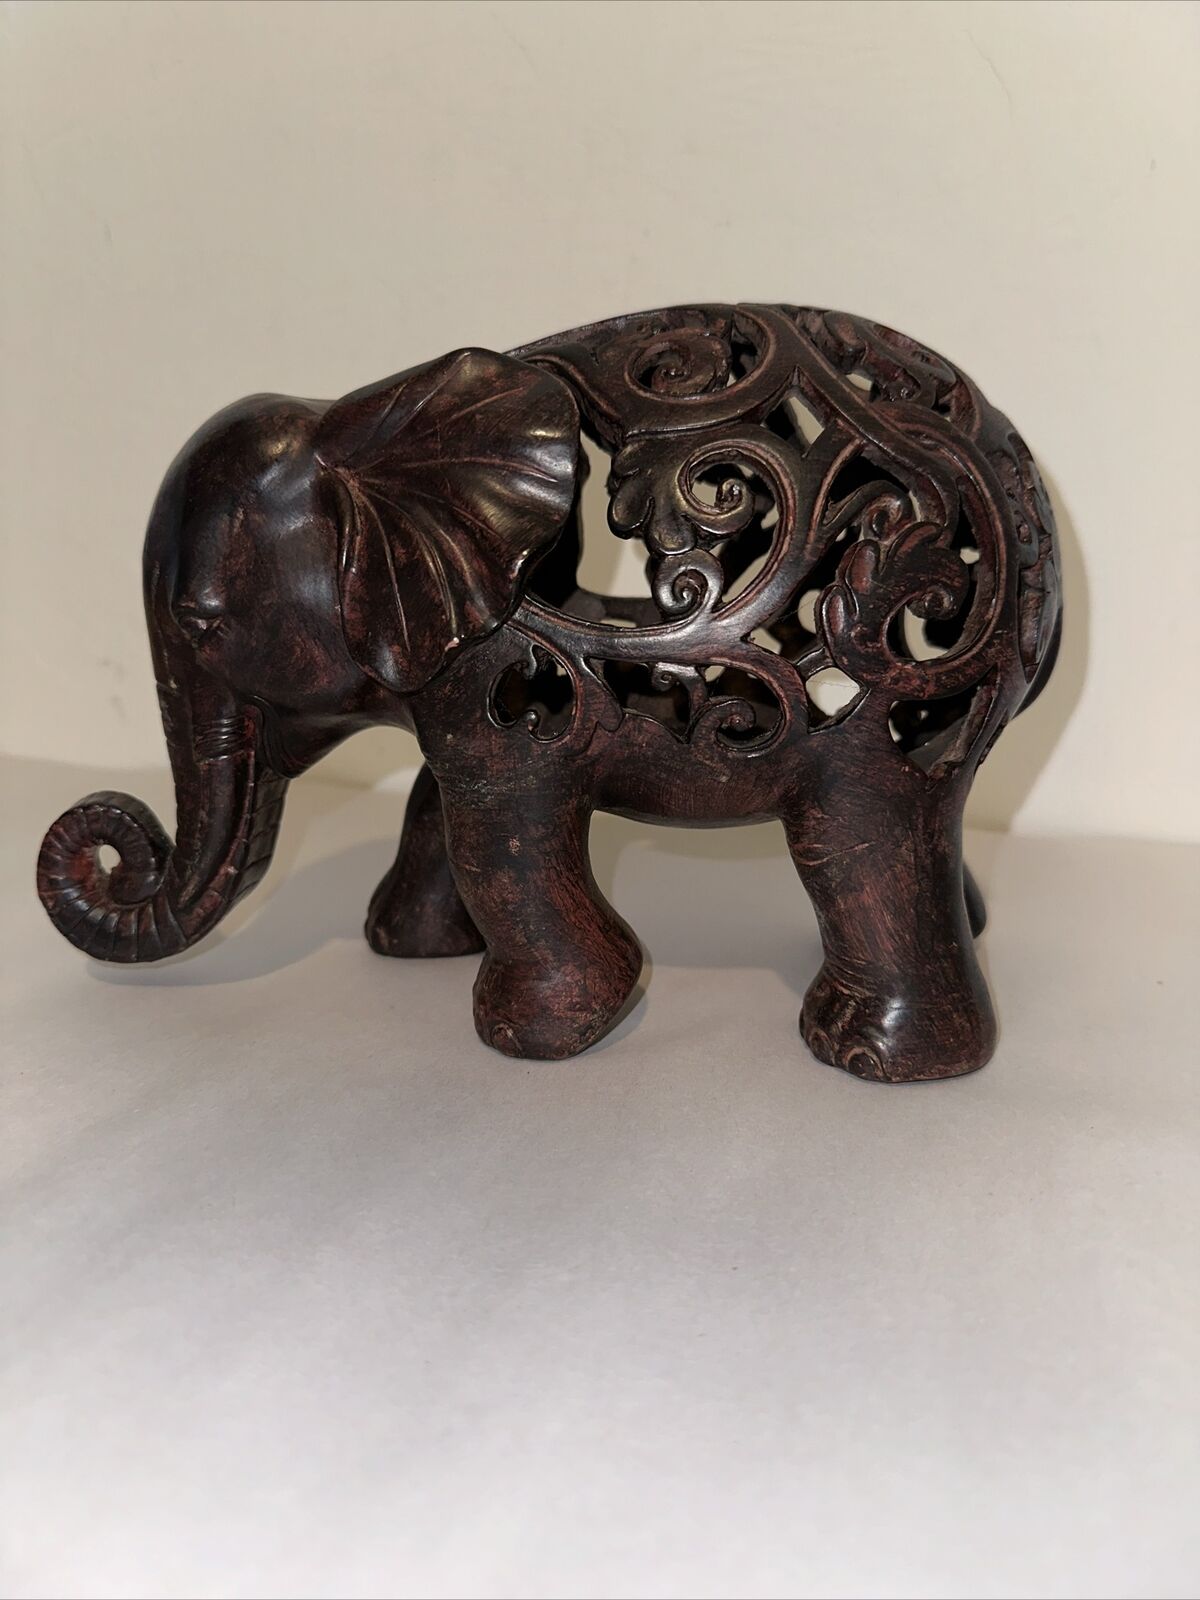 Decorative Carved Elephant Sculpture Open Work Dark Wood Tone Trunk Curved Up